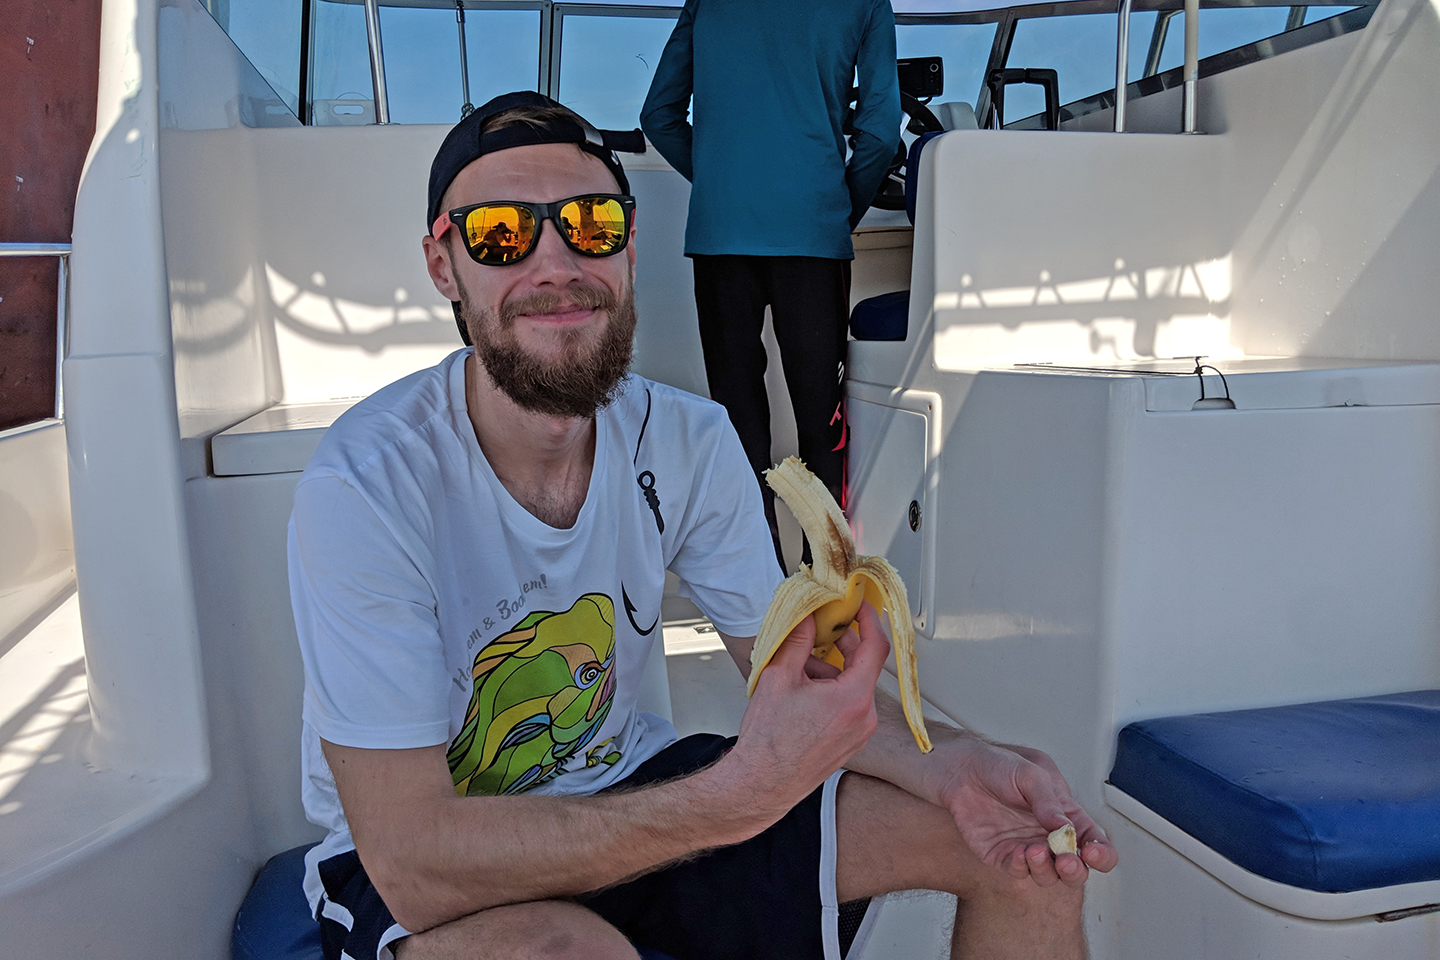 A male angler in a cap and sunglasses eating a banana on a charter fishing boat